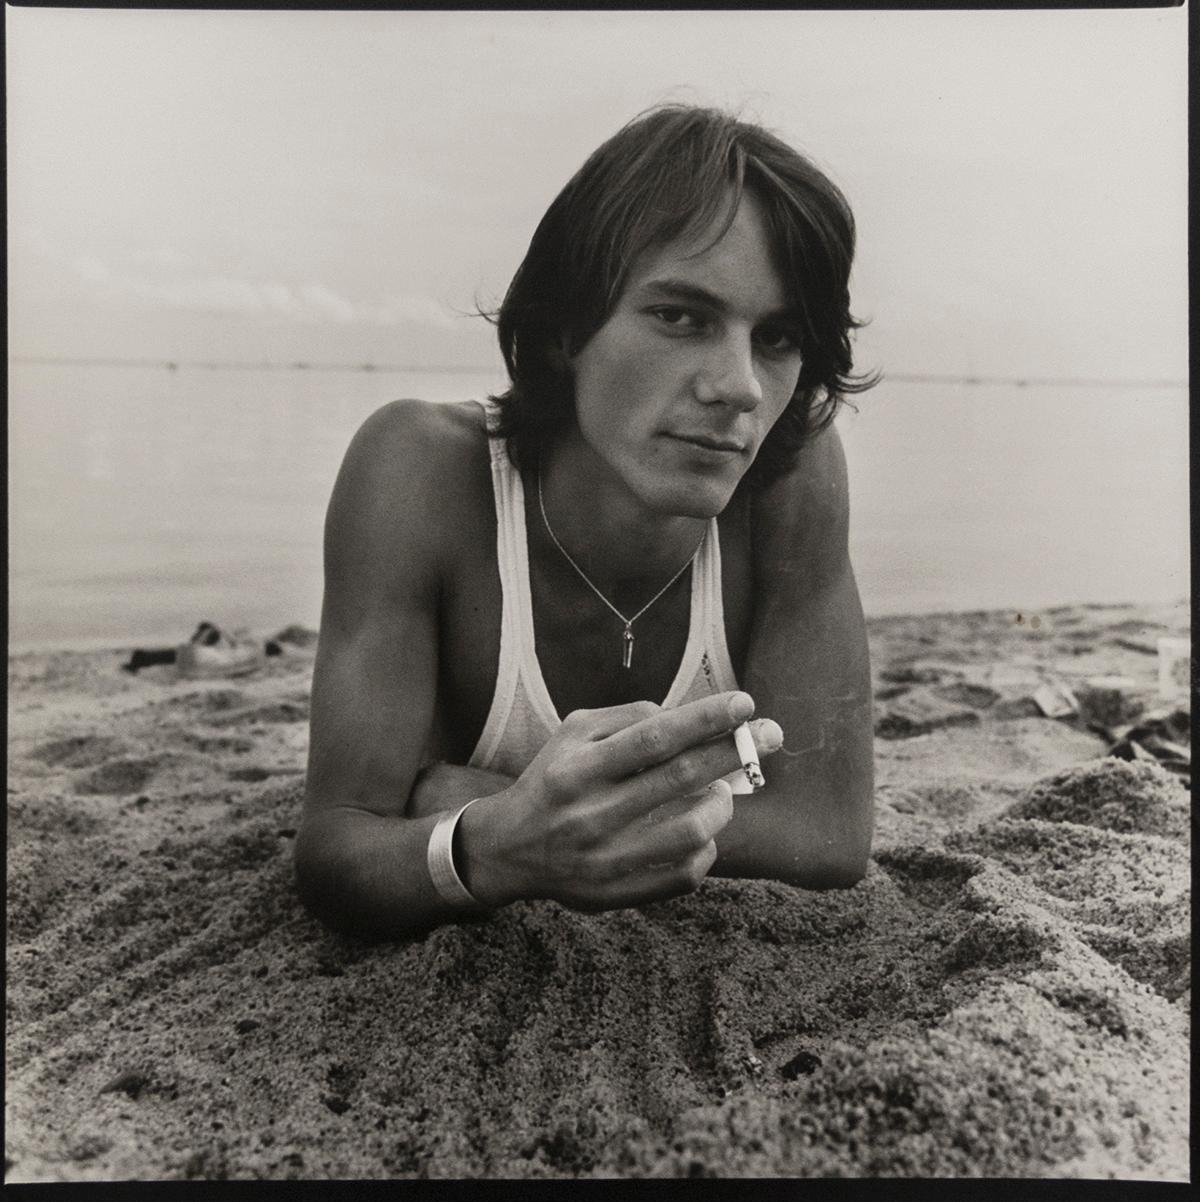 David Armstrong Black and White Photograph - George, Provincetown